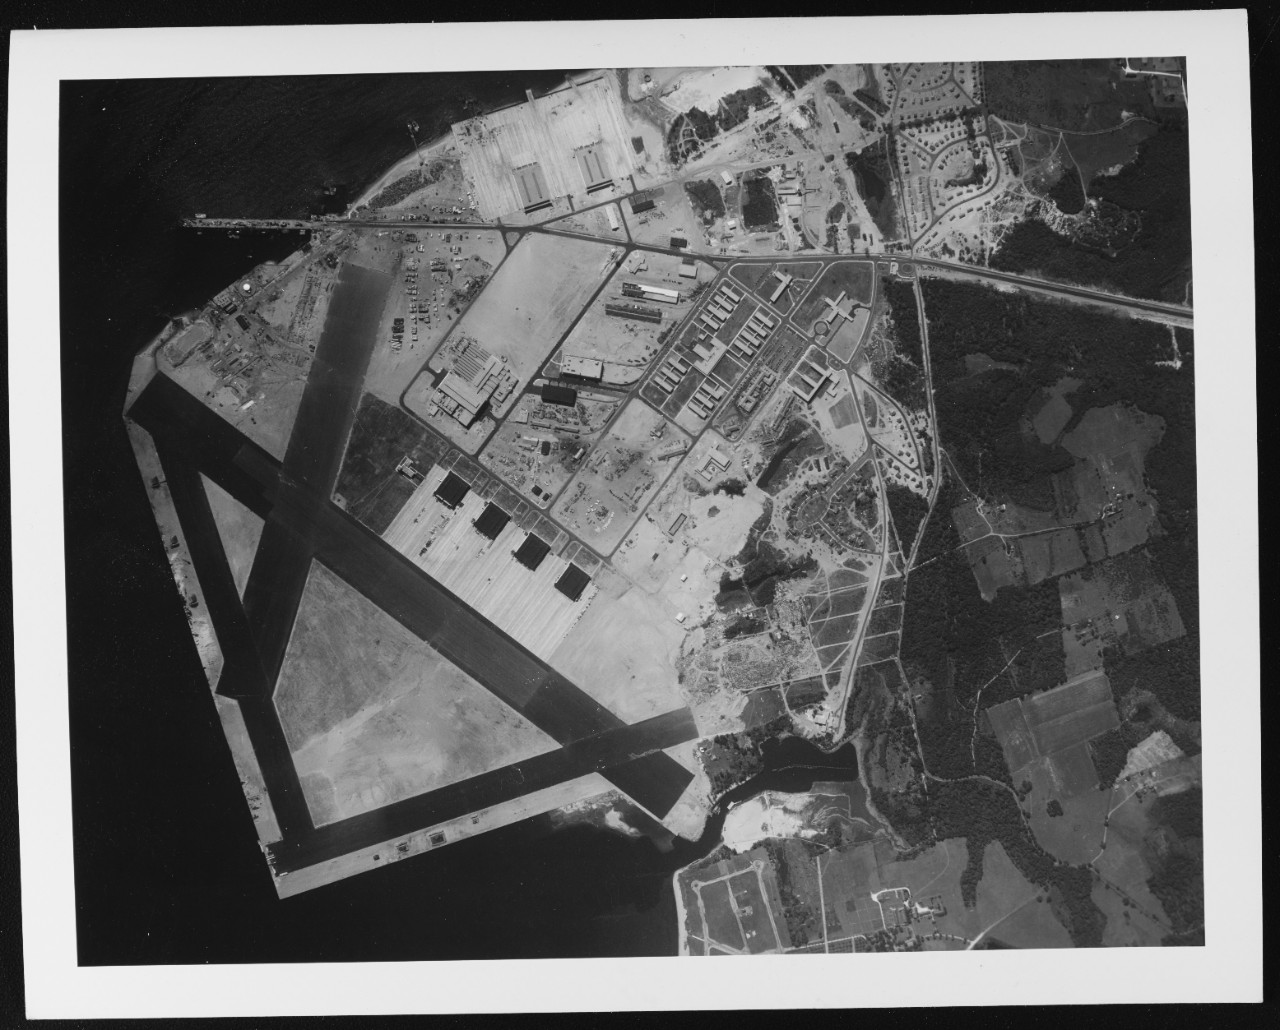 U.S. Naval Air Station, Quonset Point, Rhode Island